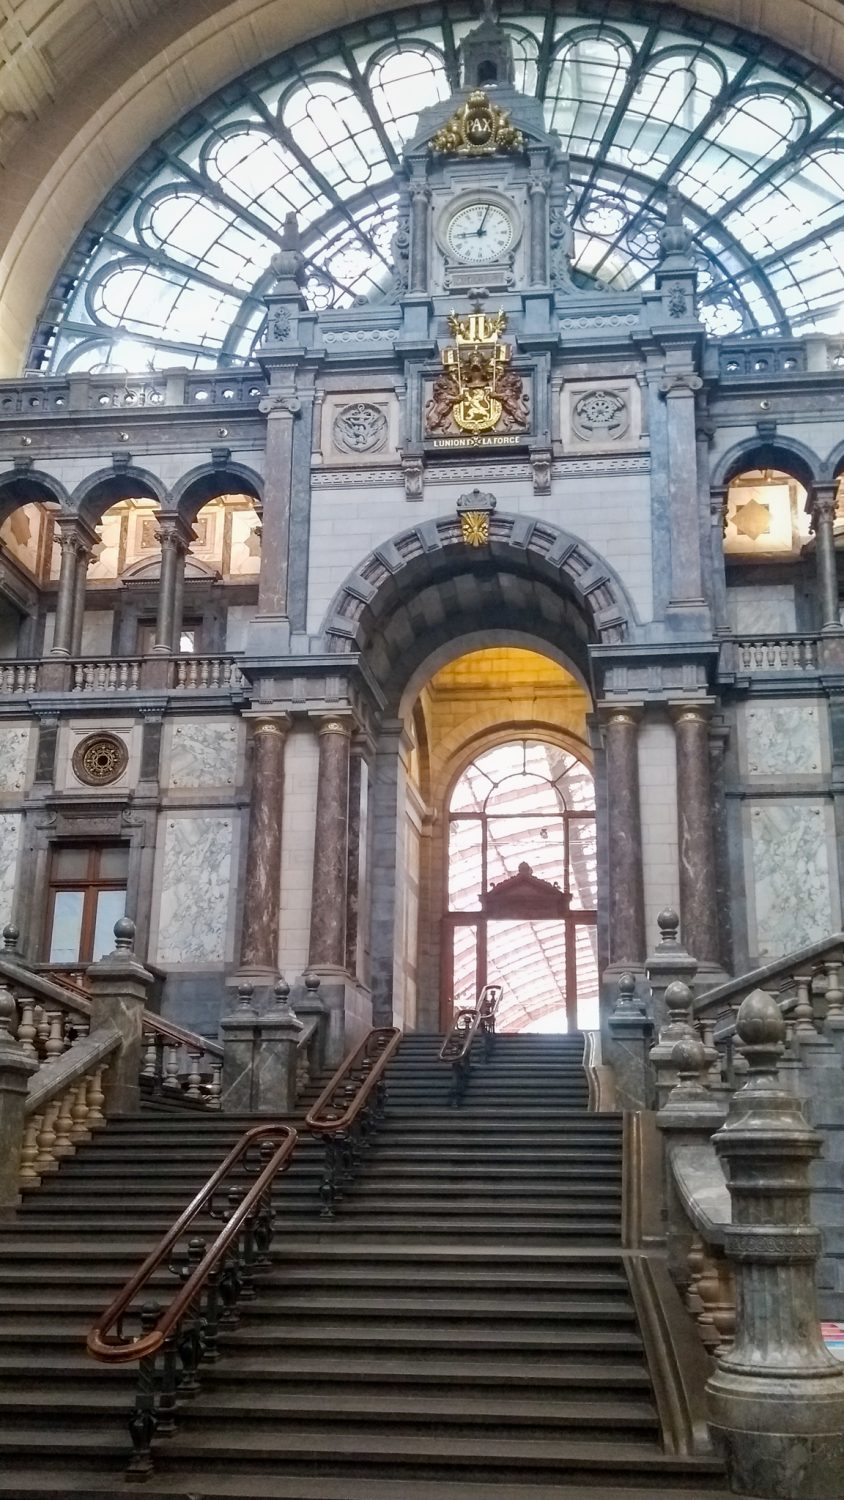 The main staircase inside Antwerp Central Station